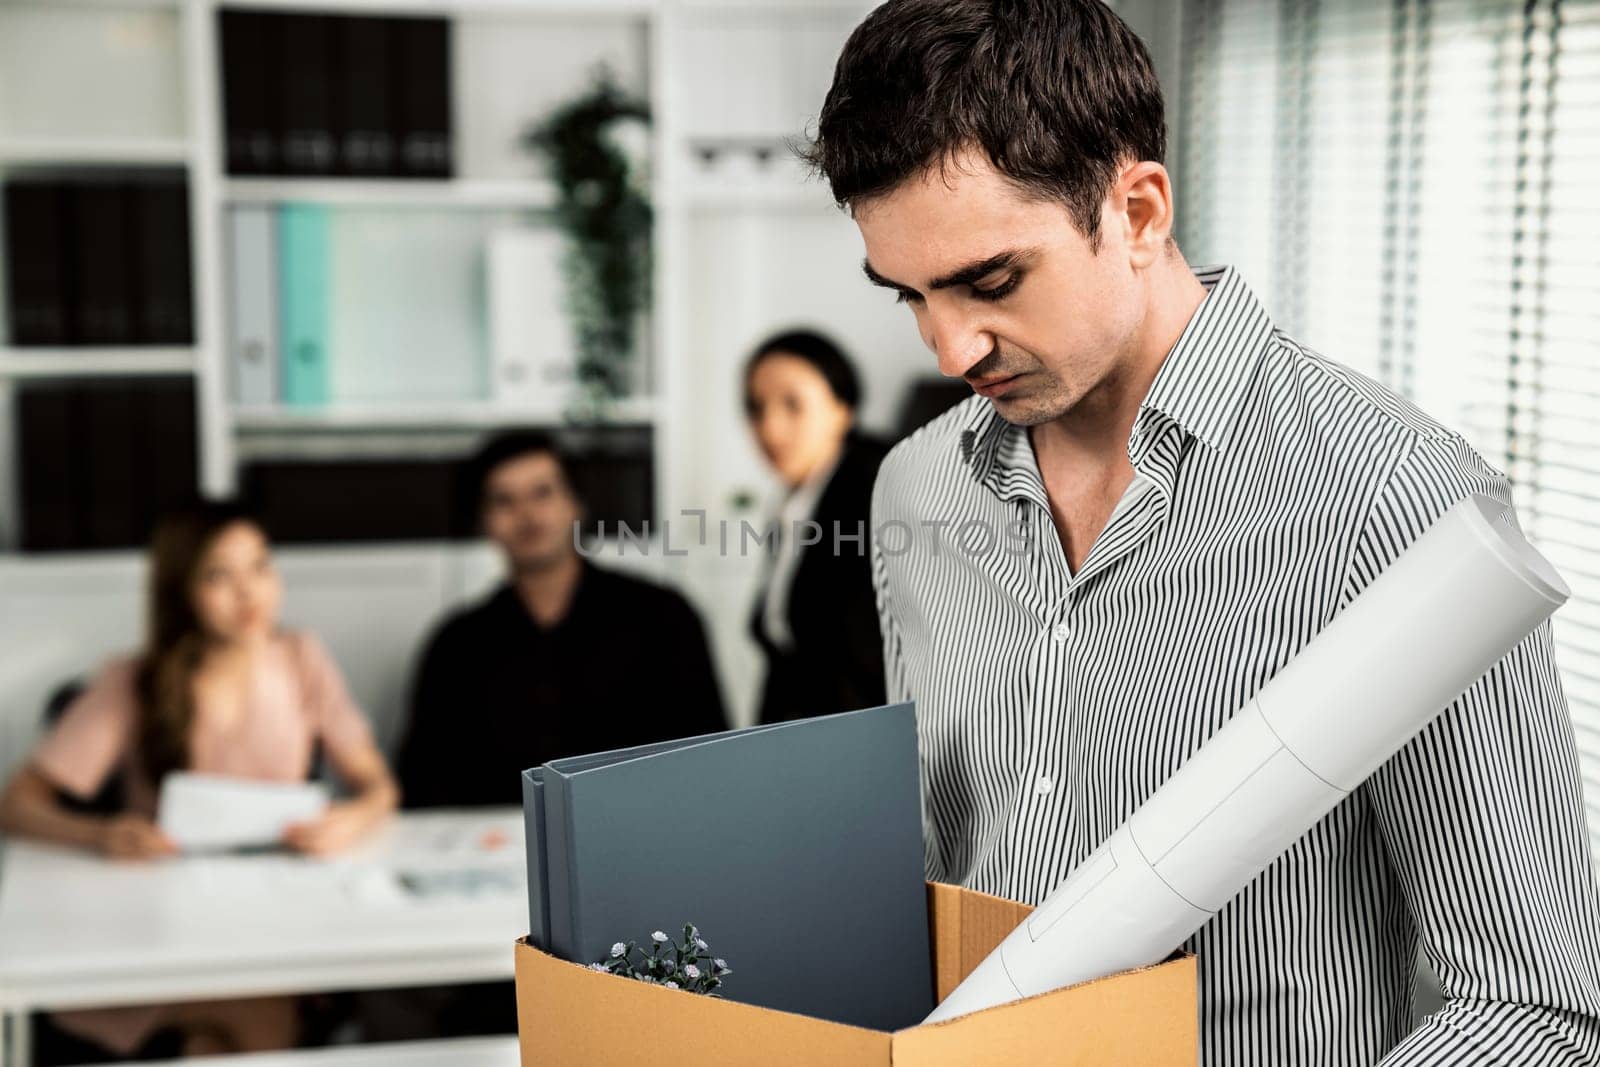 Depressed and disappointed employee packing his belongings after being fired for not being competent. Gossiped by his colleagues behind his back. Layoff due to economic depression.